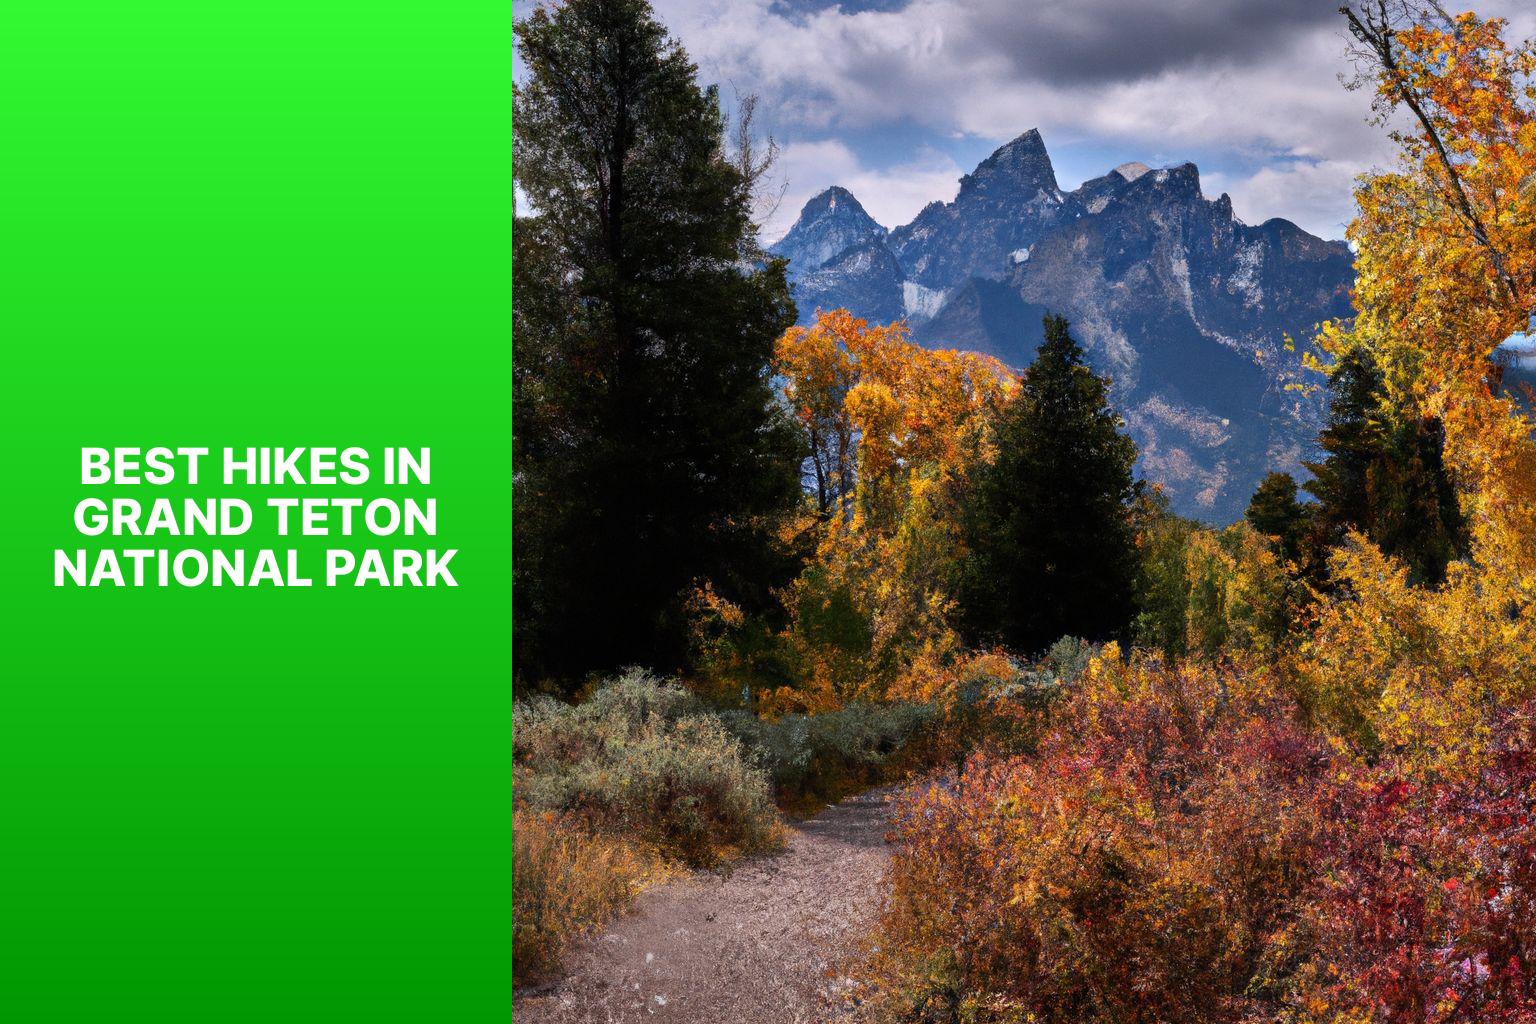 best hikes in grand teton national parkw104